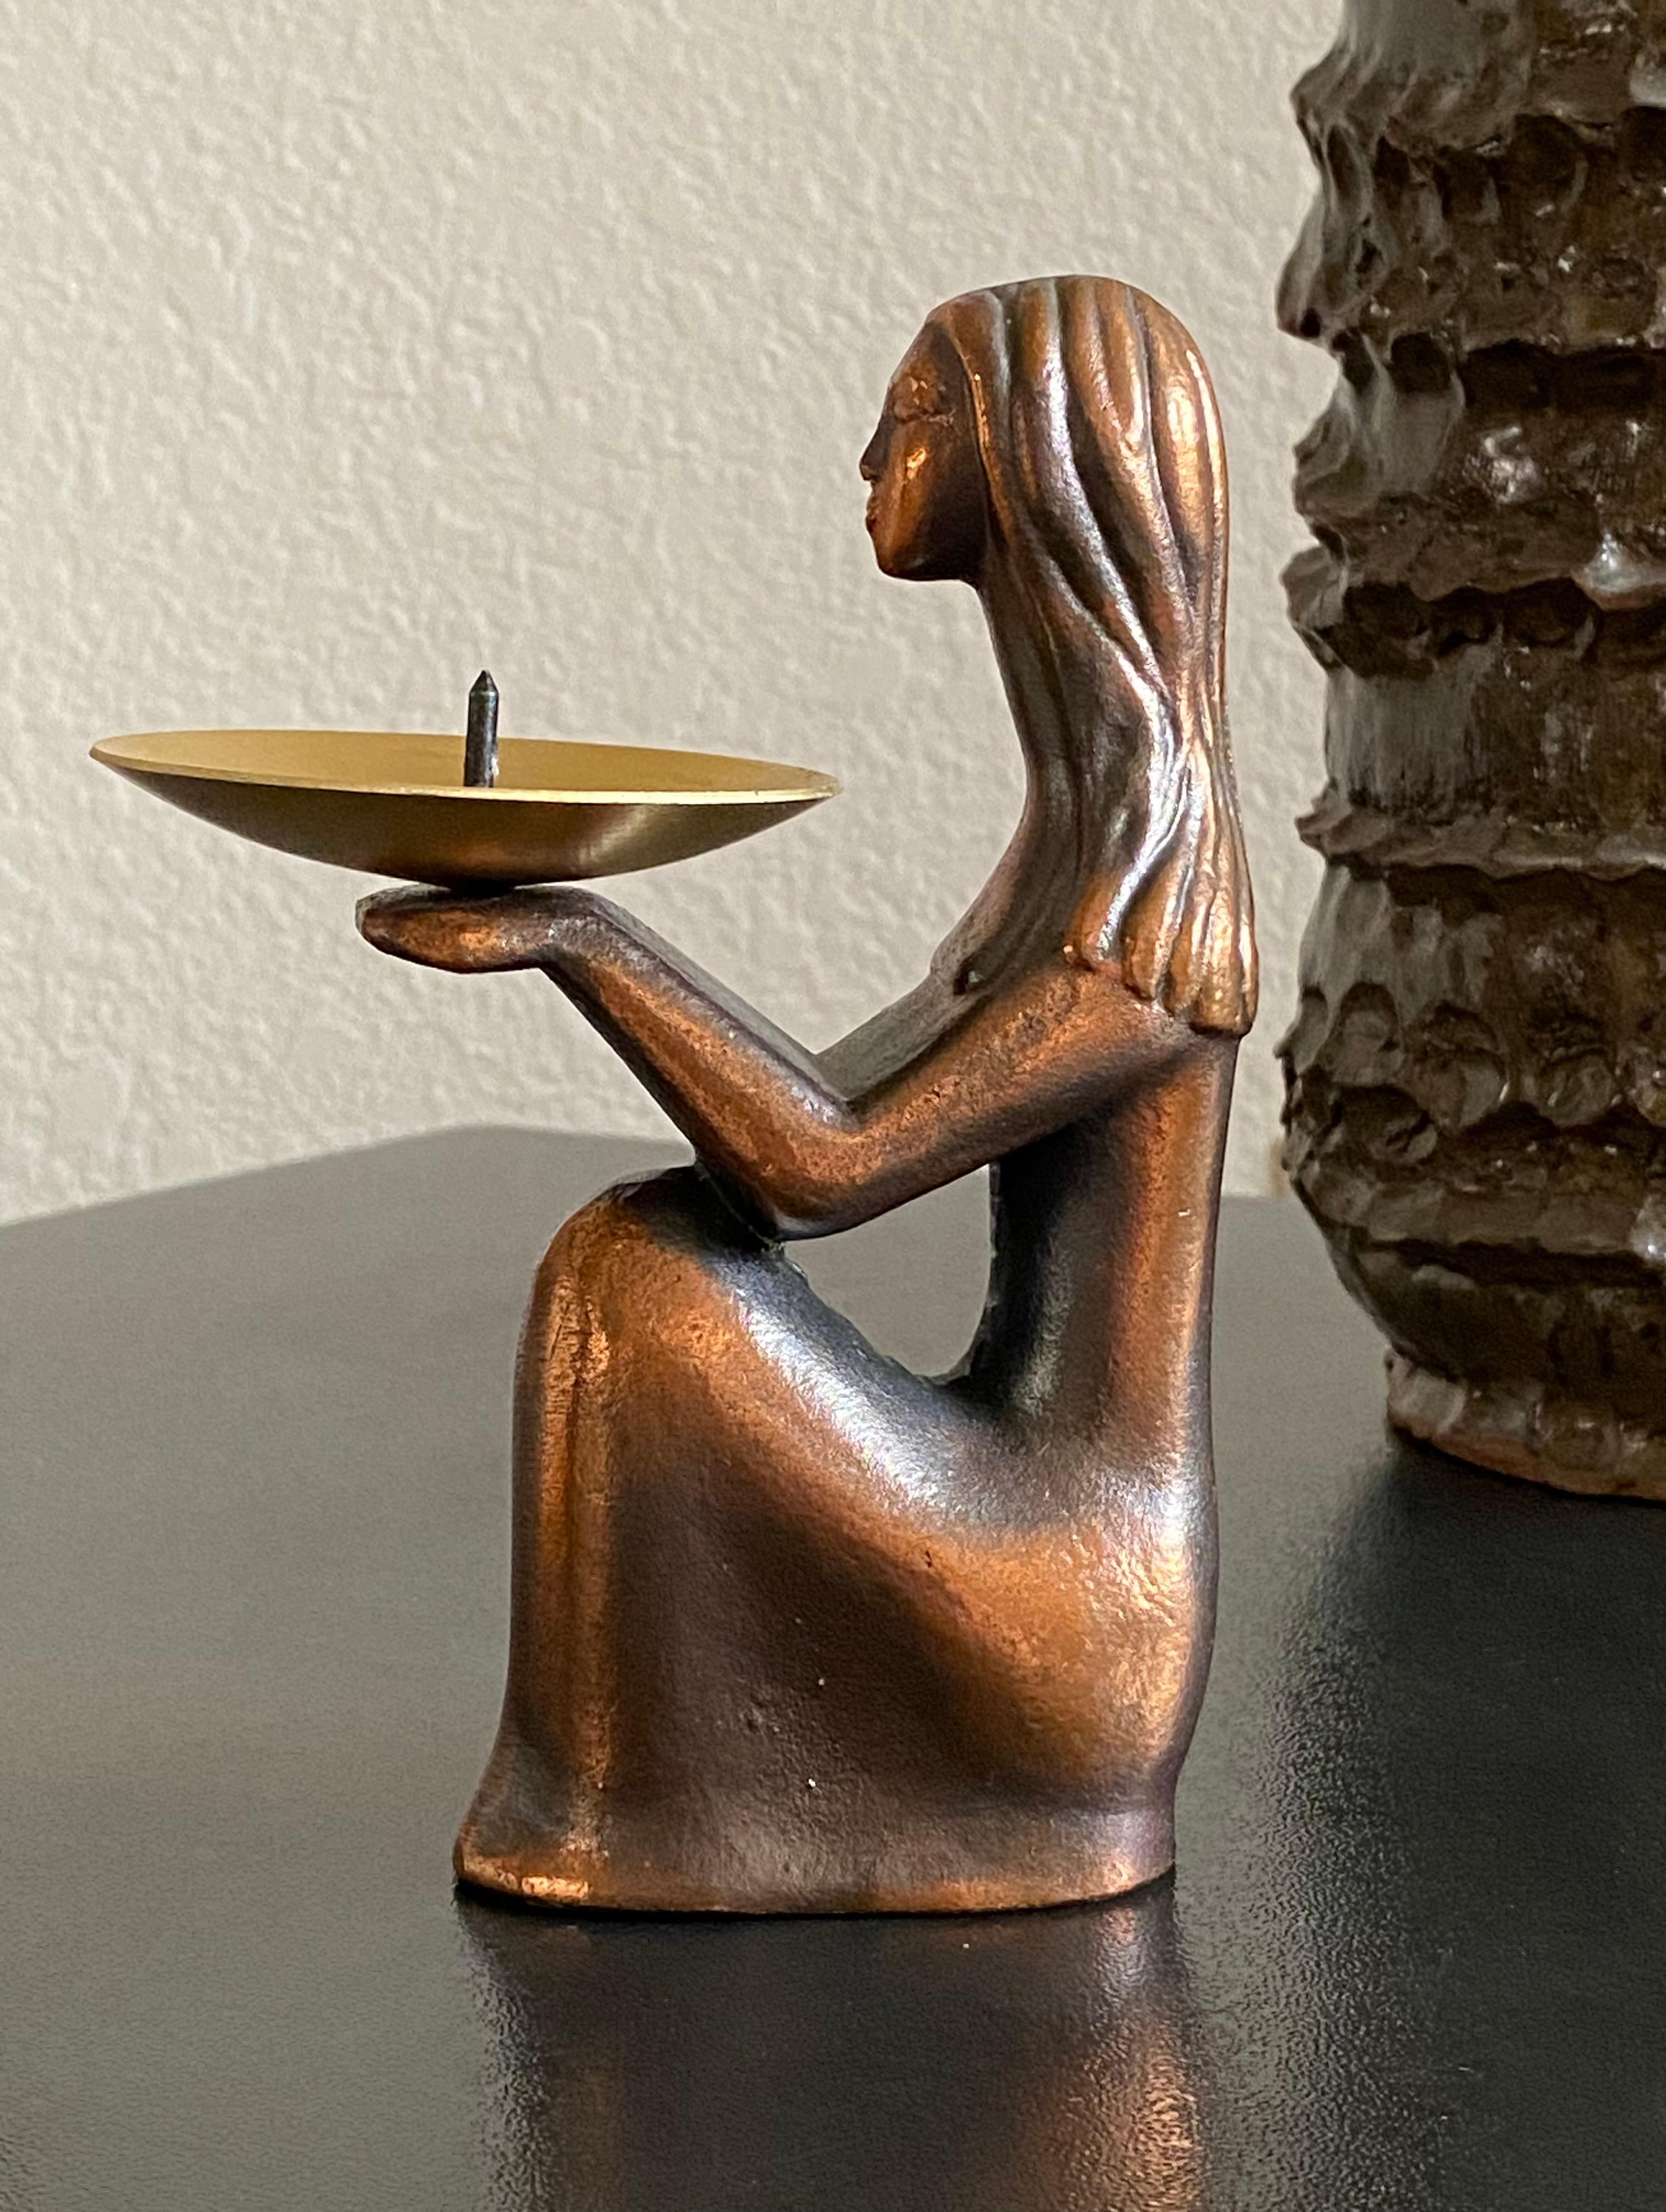 Former Soviet era (1970s) candle holder…artist-titled ‘Good Night’ with original label to base in Russian. Nice hand feel and weight on copper-finished form. 

The feminine figure displays a peaceful, graceful stance and expression. We sense an Art